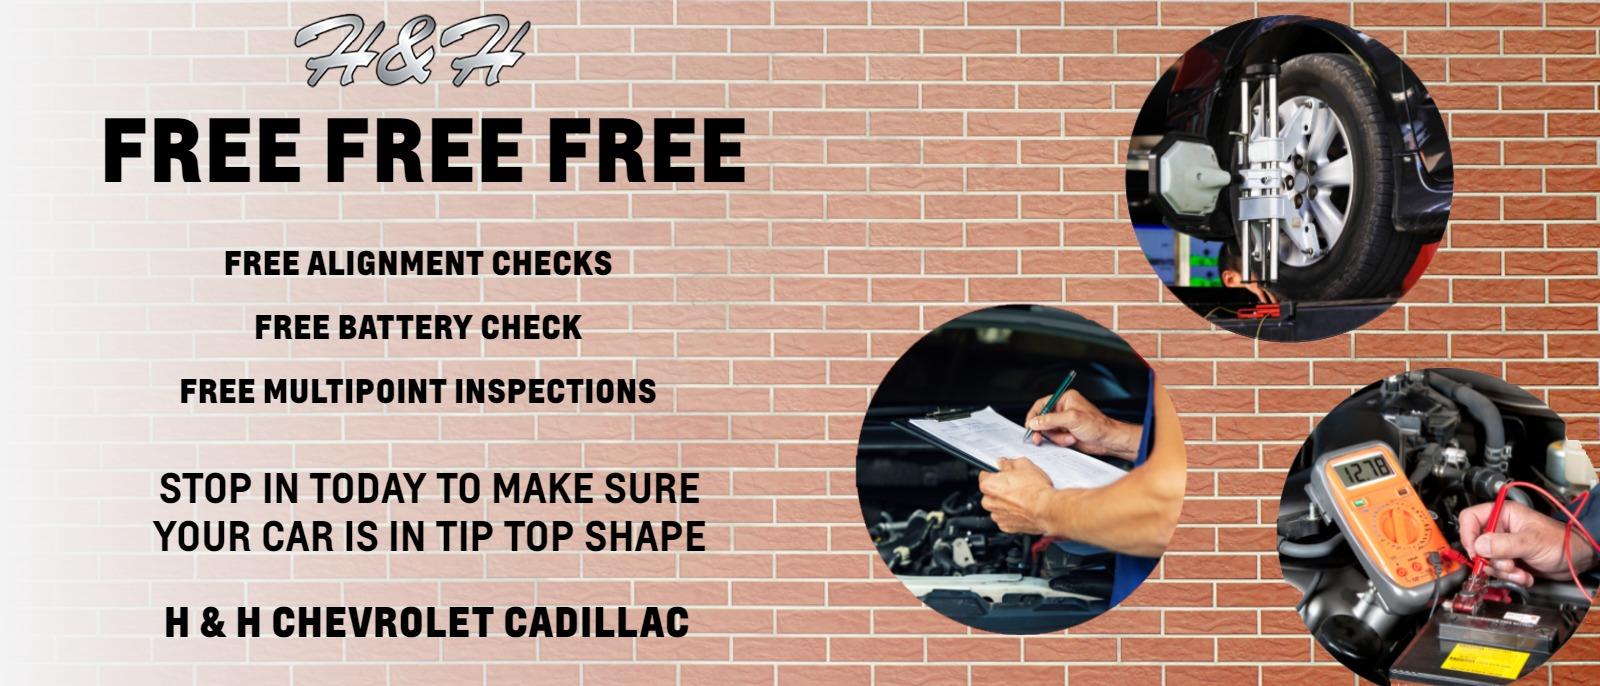 Stop in today to make sure your car is in tip top shape